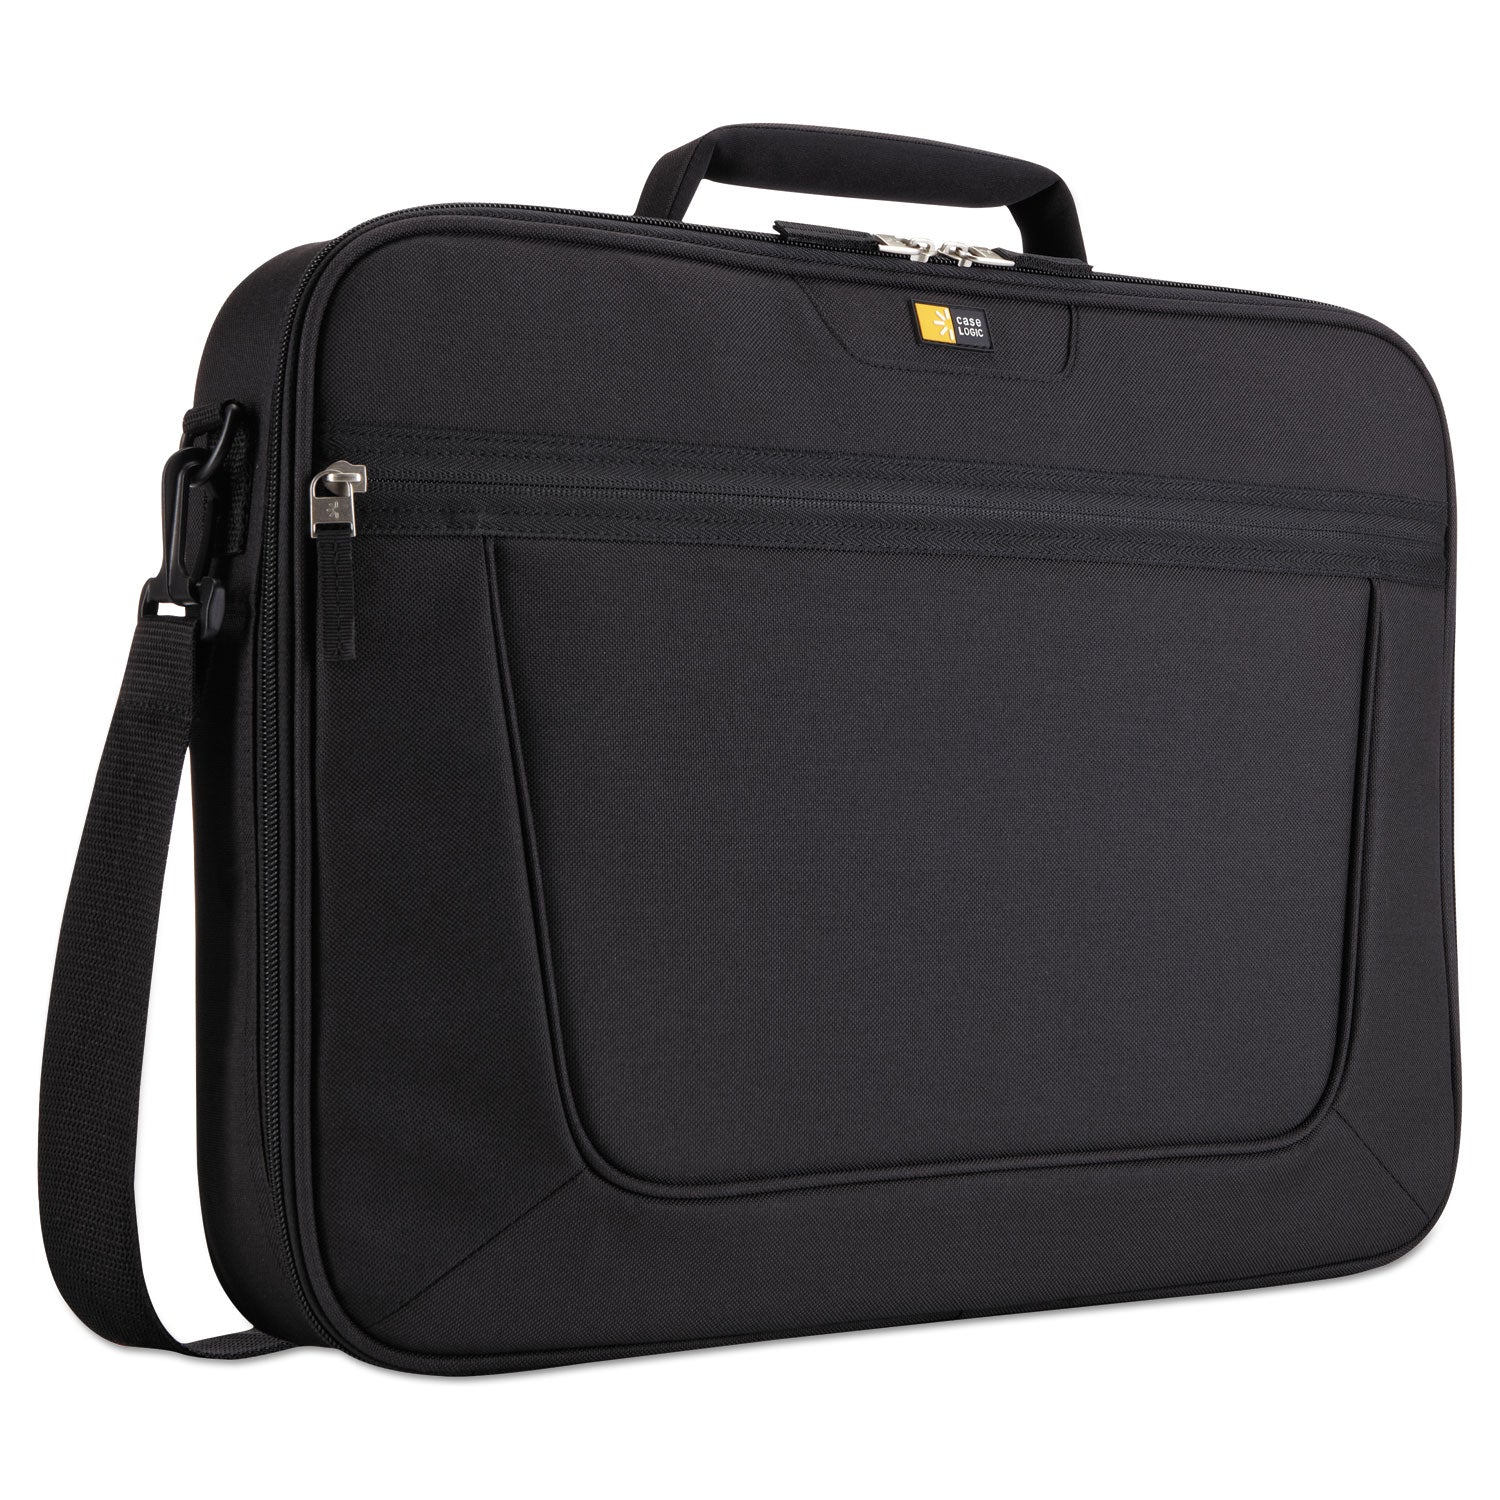 primary-laptop-clamshell-case-fits-devices-up-to-17-polyester-185-x-35-x-157-black_clg3201490 - 1